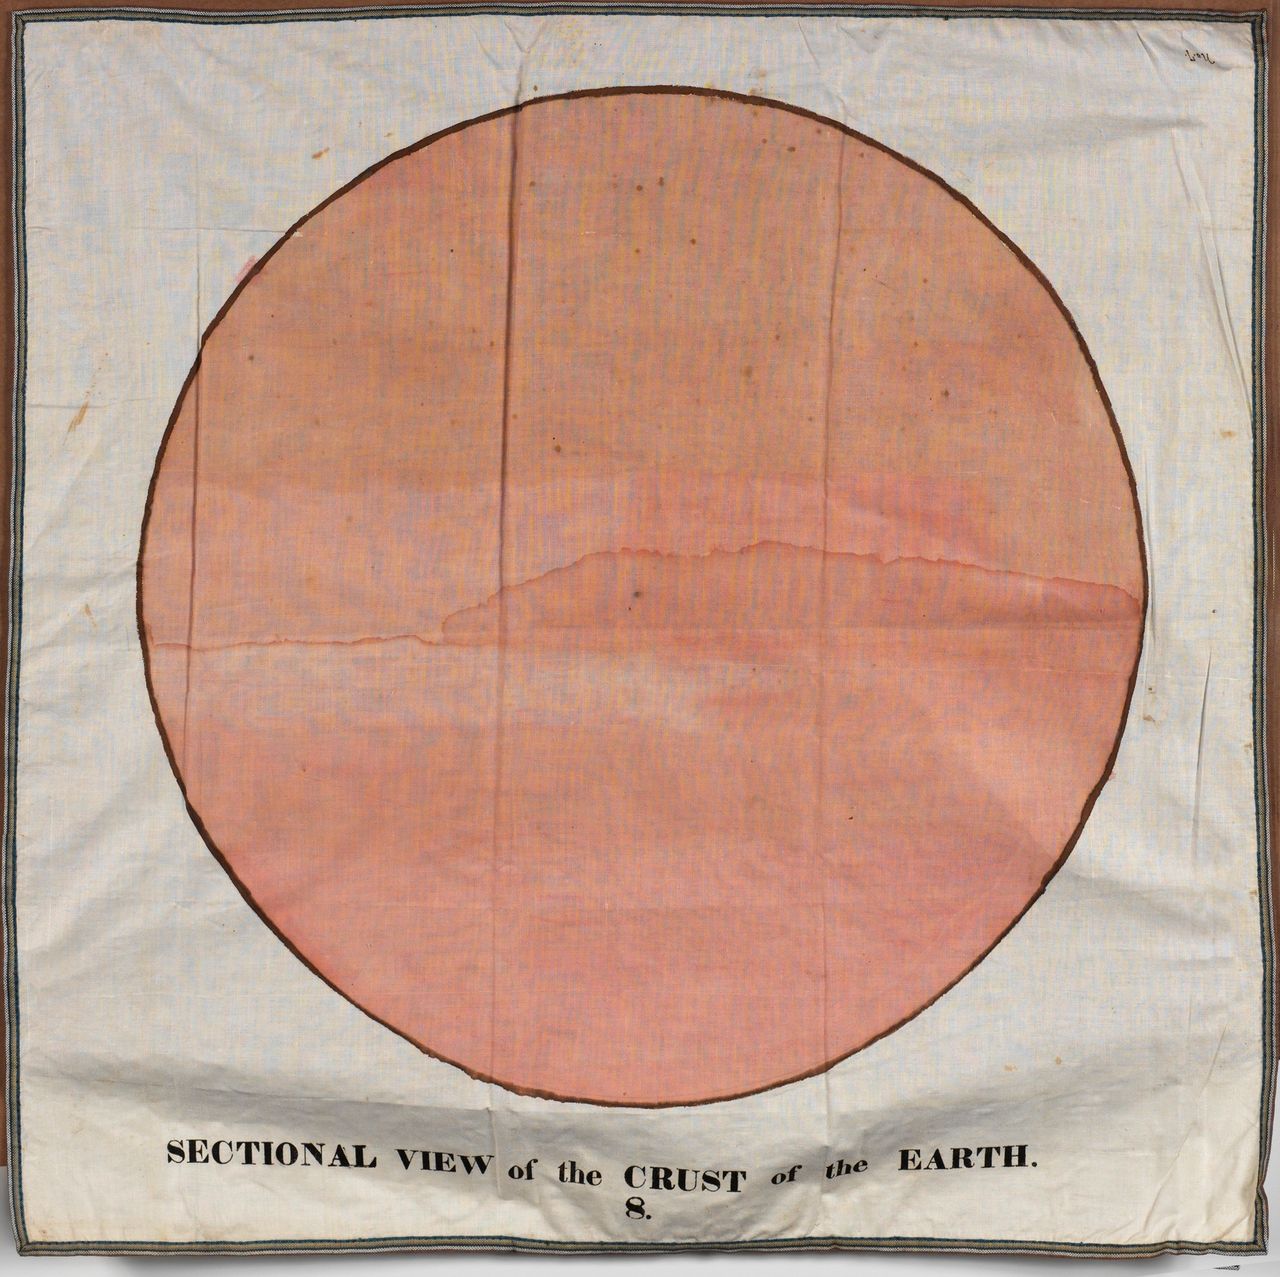 Another classroom chart, titled "Sectional View of the Crust of the Earth," created by Orra White Hitchcock circa 1830-1840.